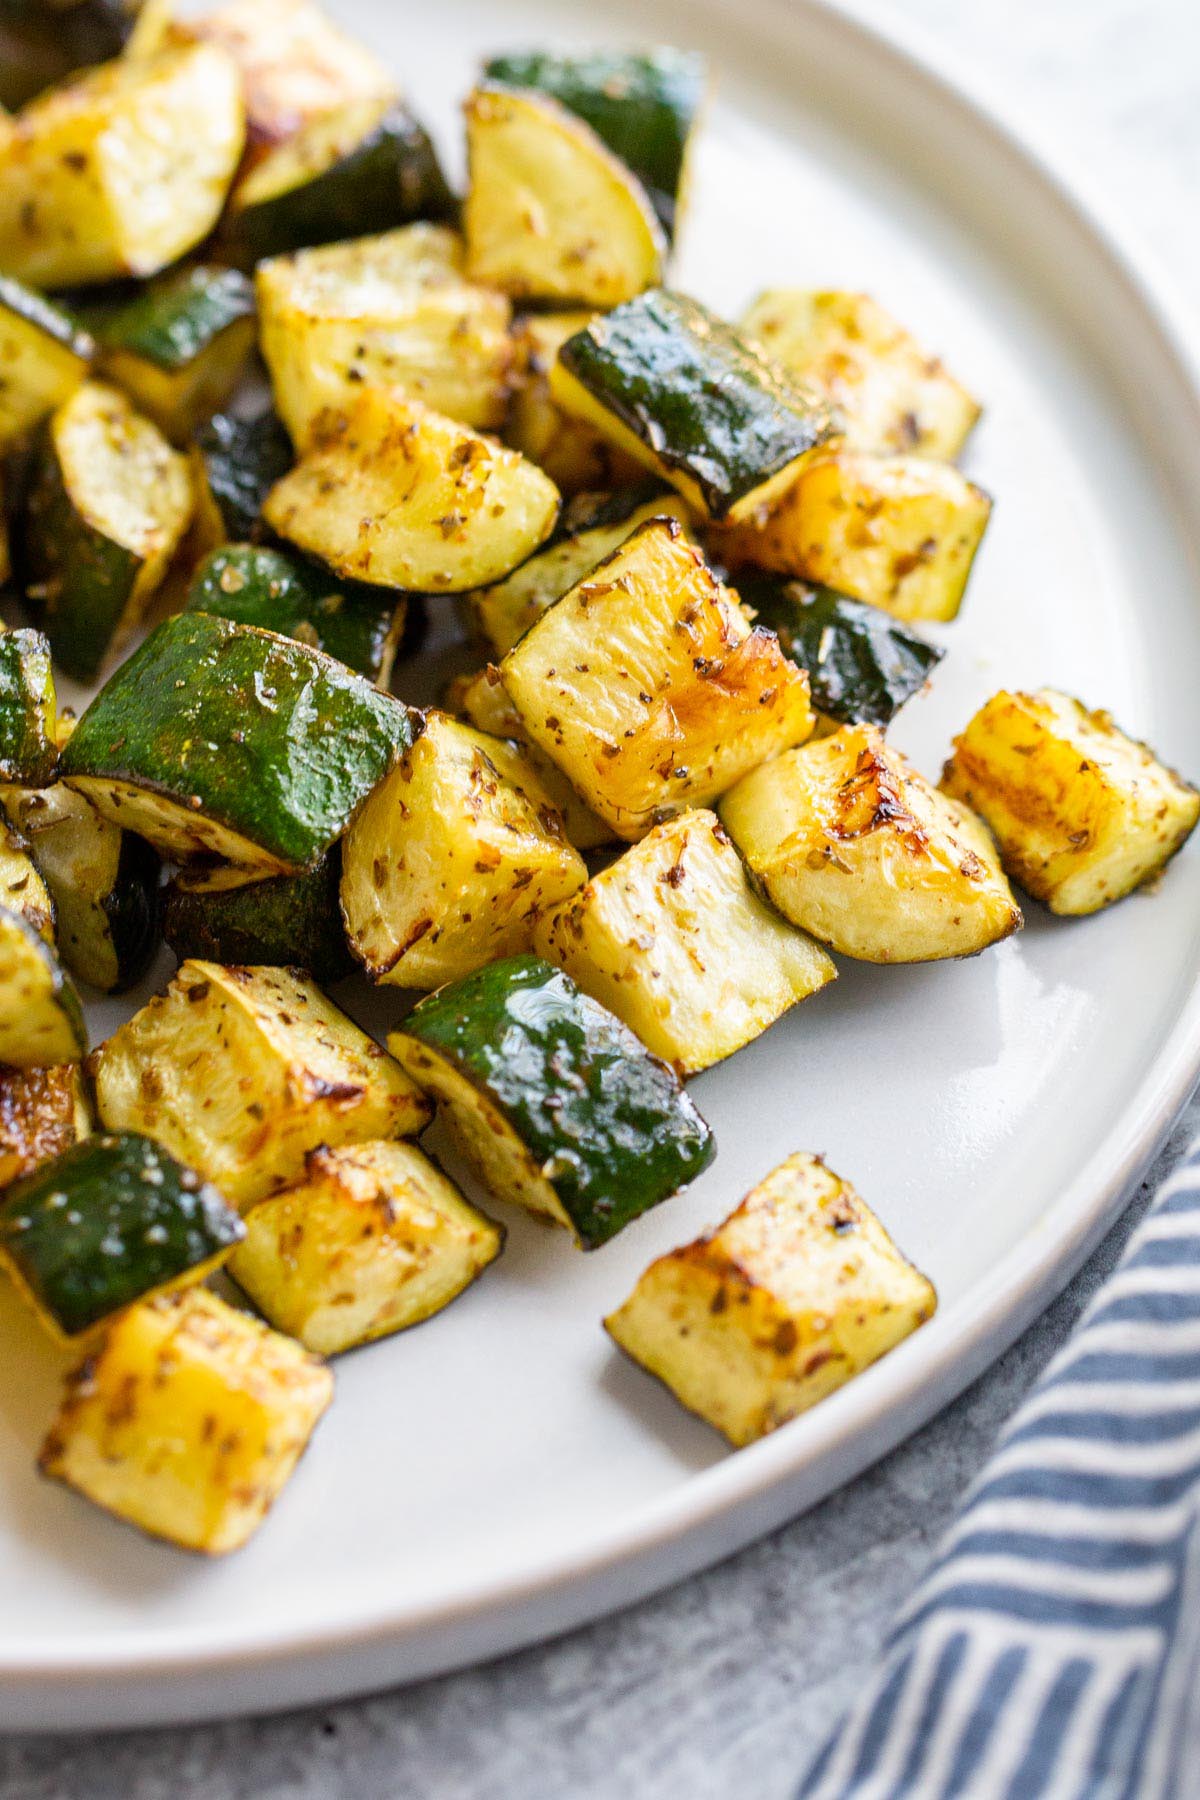 Roasted zucchini on a white plate.